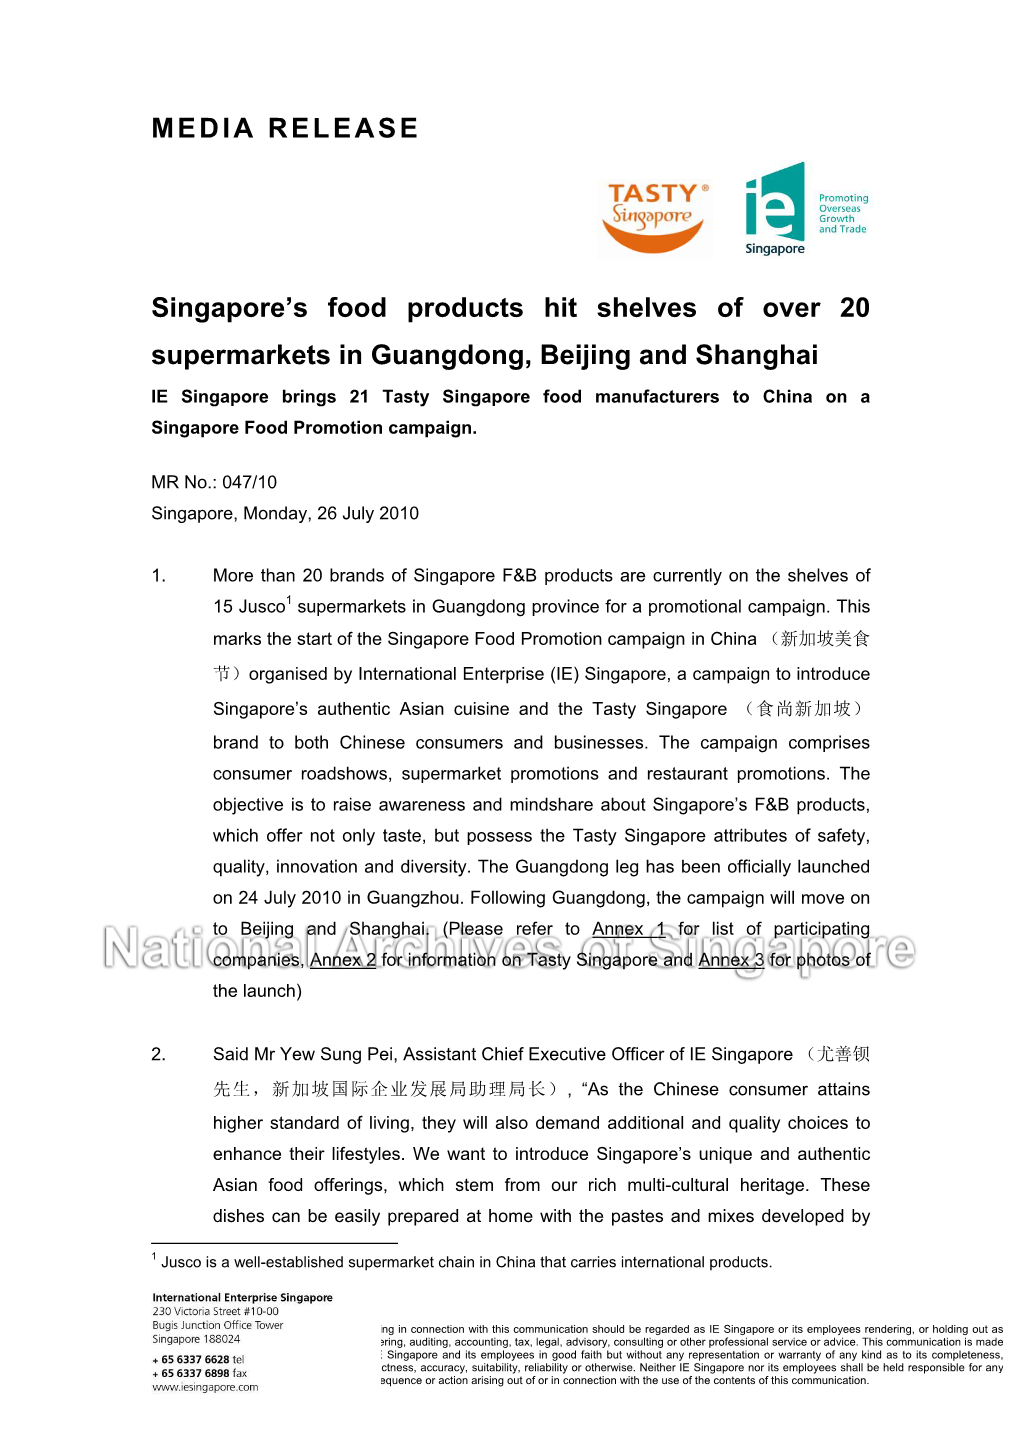 MEDIA RELEASE Singapore's Food Products Hit Shelves of Over 20